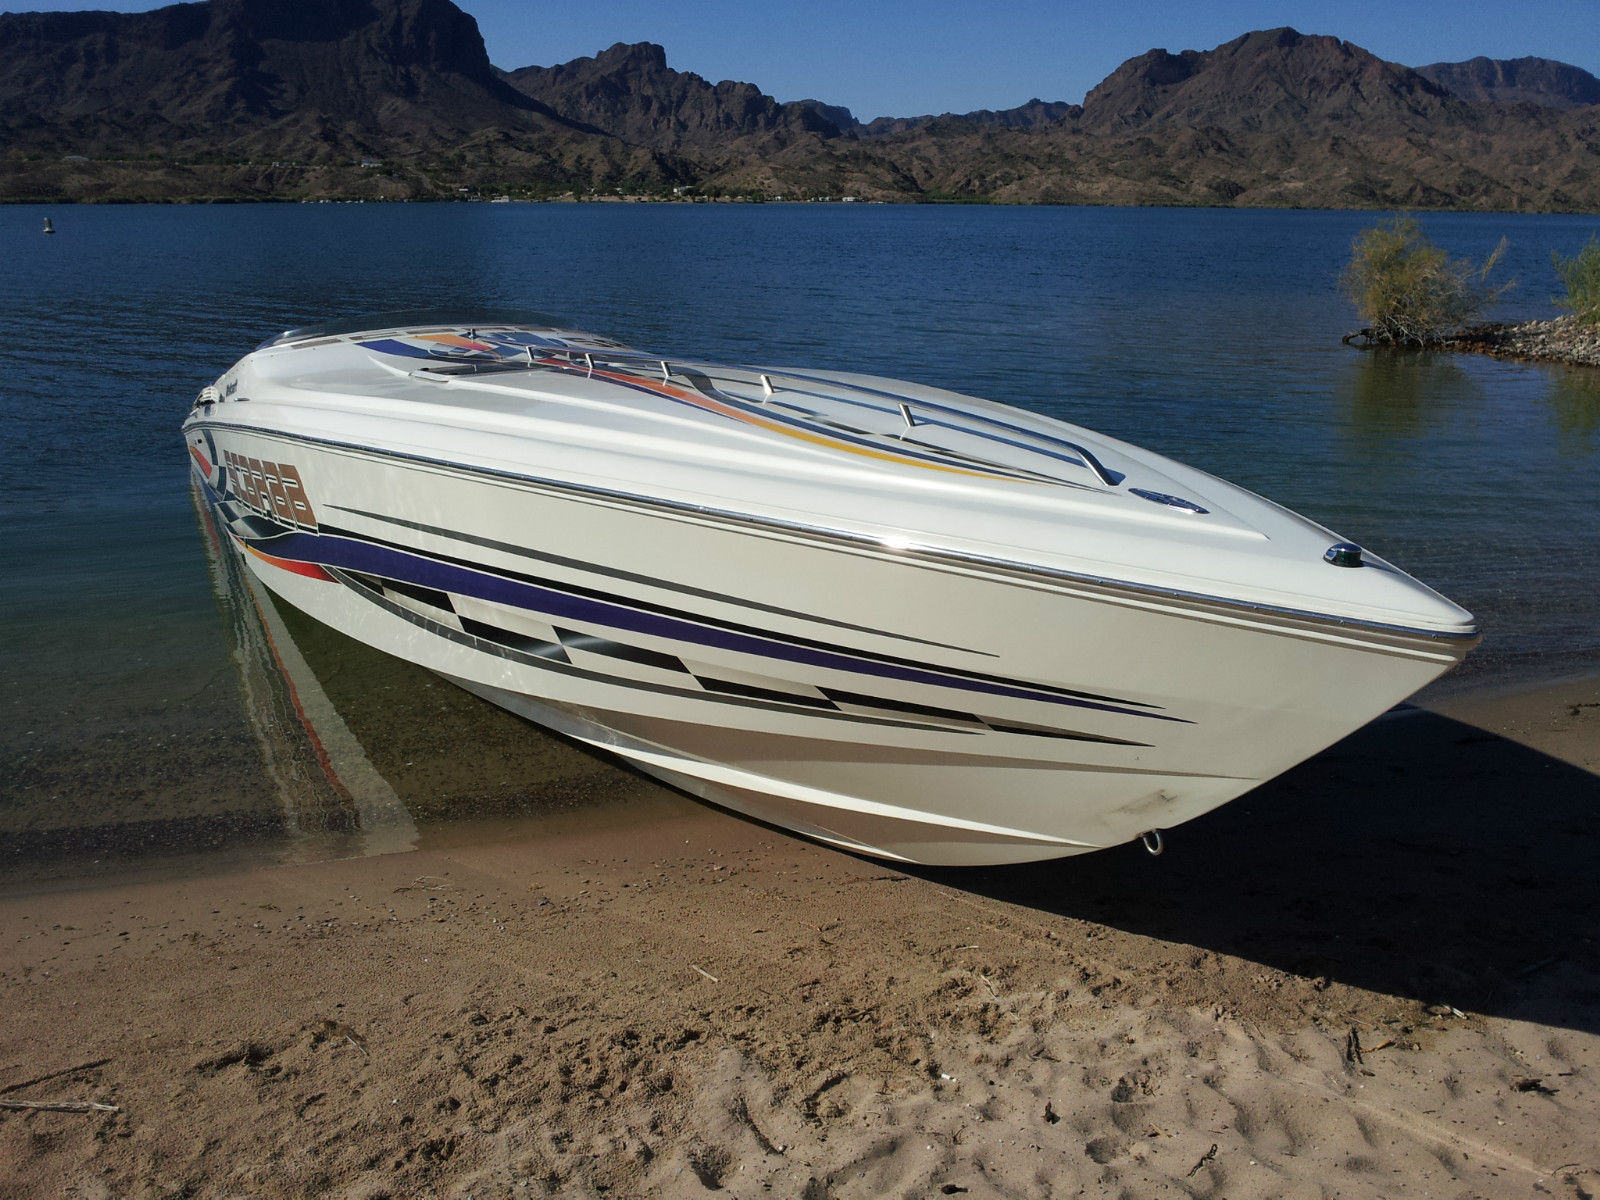 Wellcraft Scarab 38 AVS 2001 for sale for $65,000.